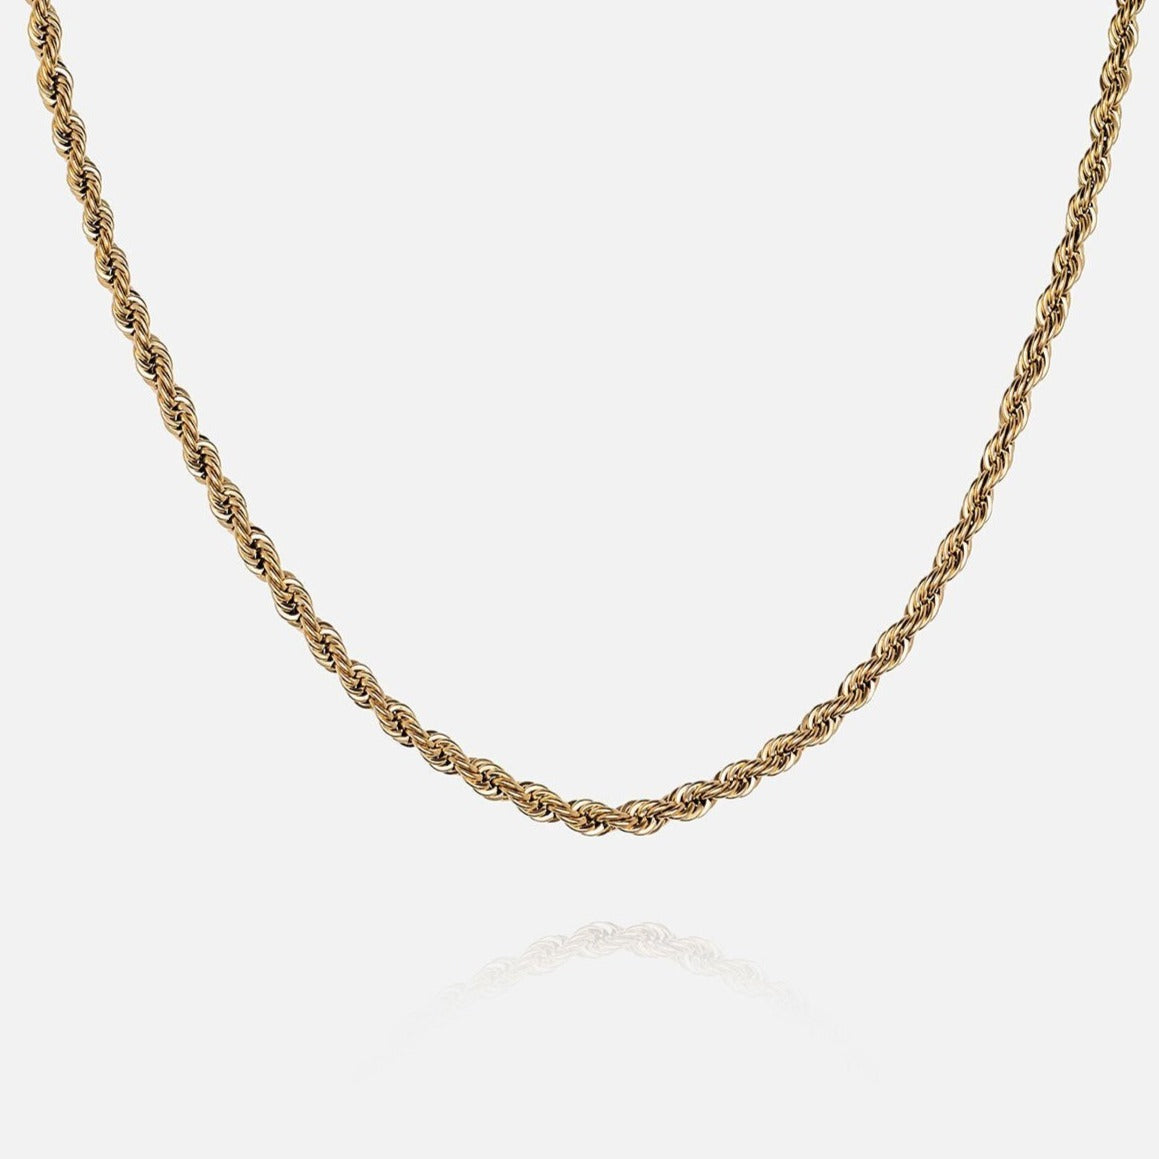 5mm Rope Chain Silver Gold - THE GASPER